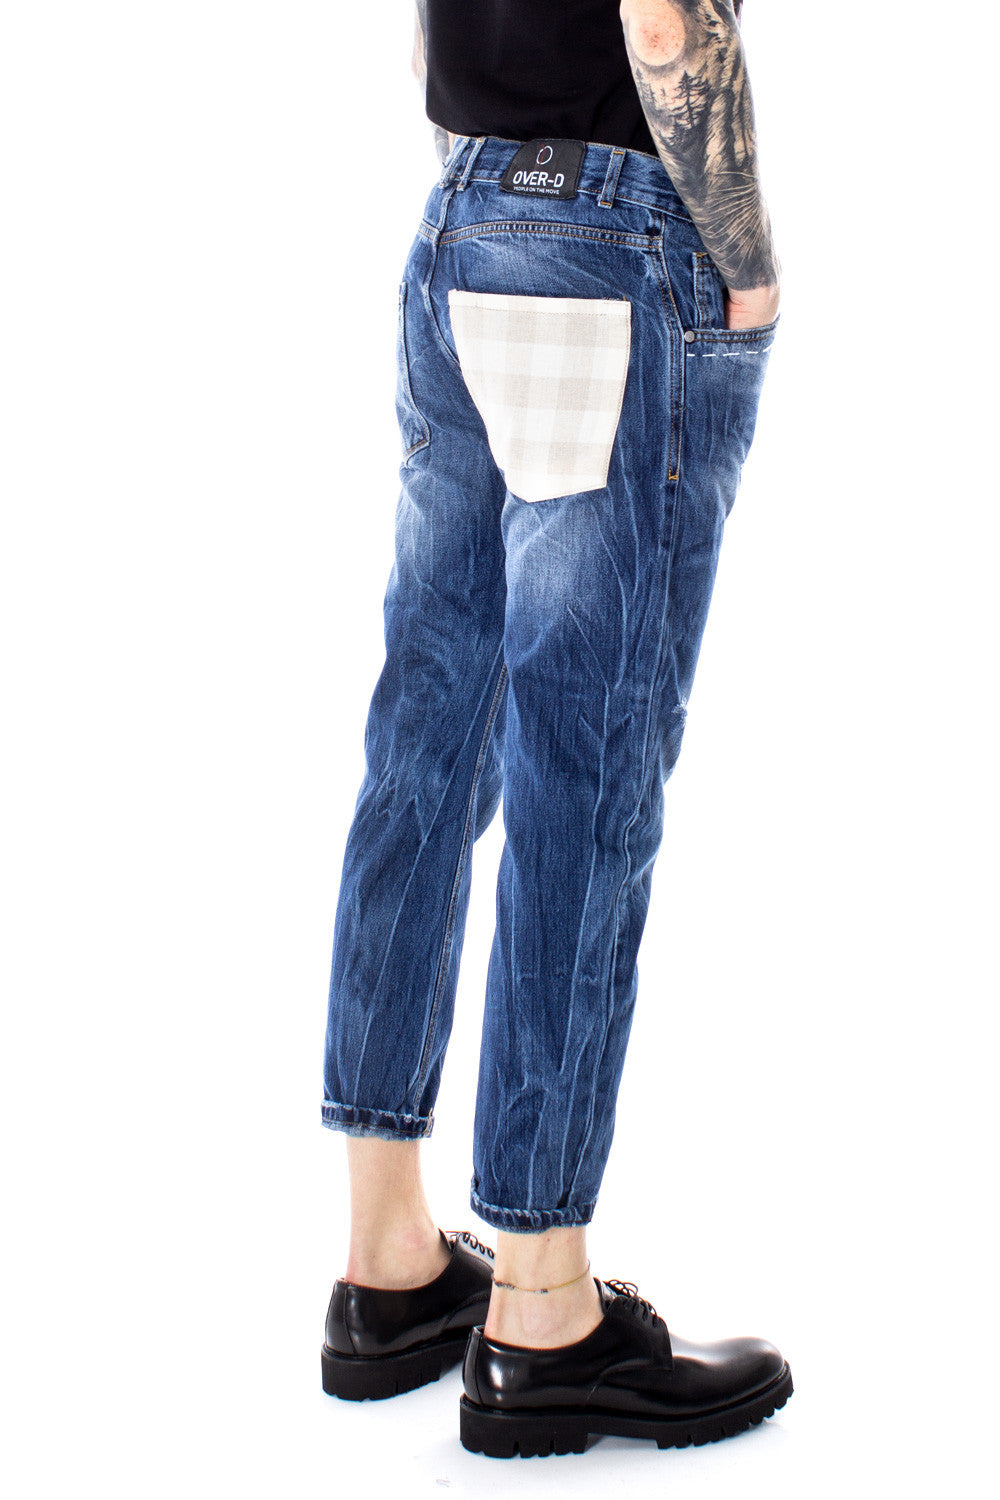 Over-d Jeans Uomo